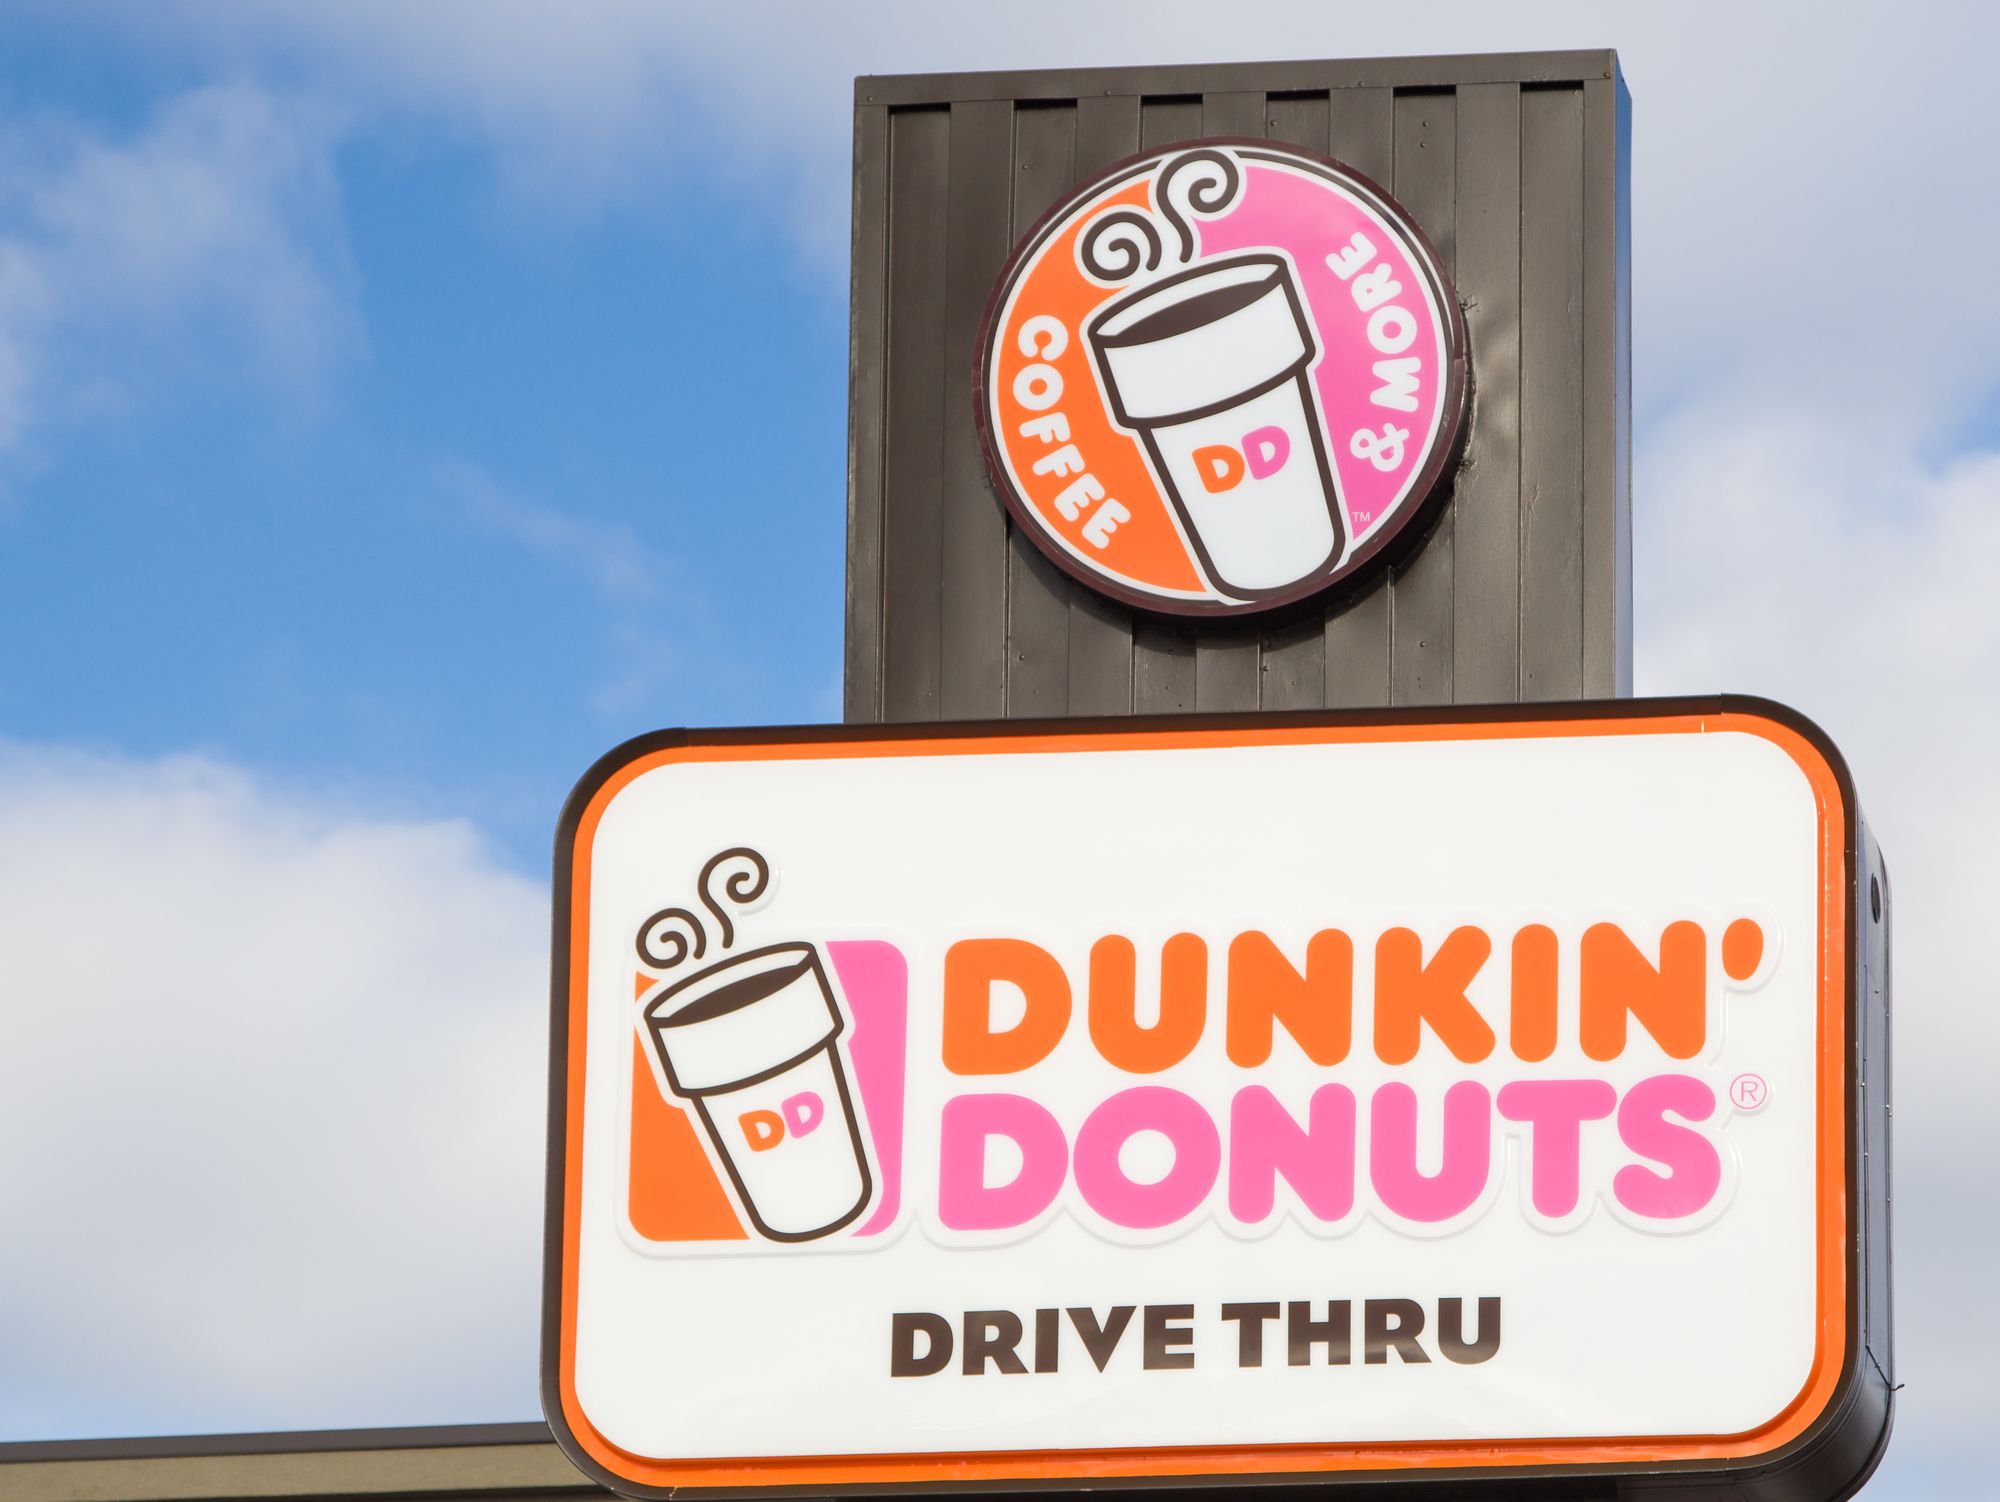 ST. PAUL, MN/USA - JANUARY 1, 2017: Dunkin' Donuts restauraunt exterior. Dunkin' Donuts is a doughnut company and coffeehouse chain.